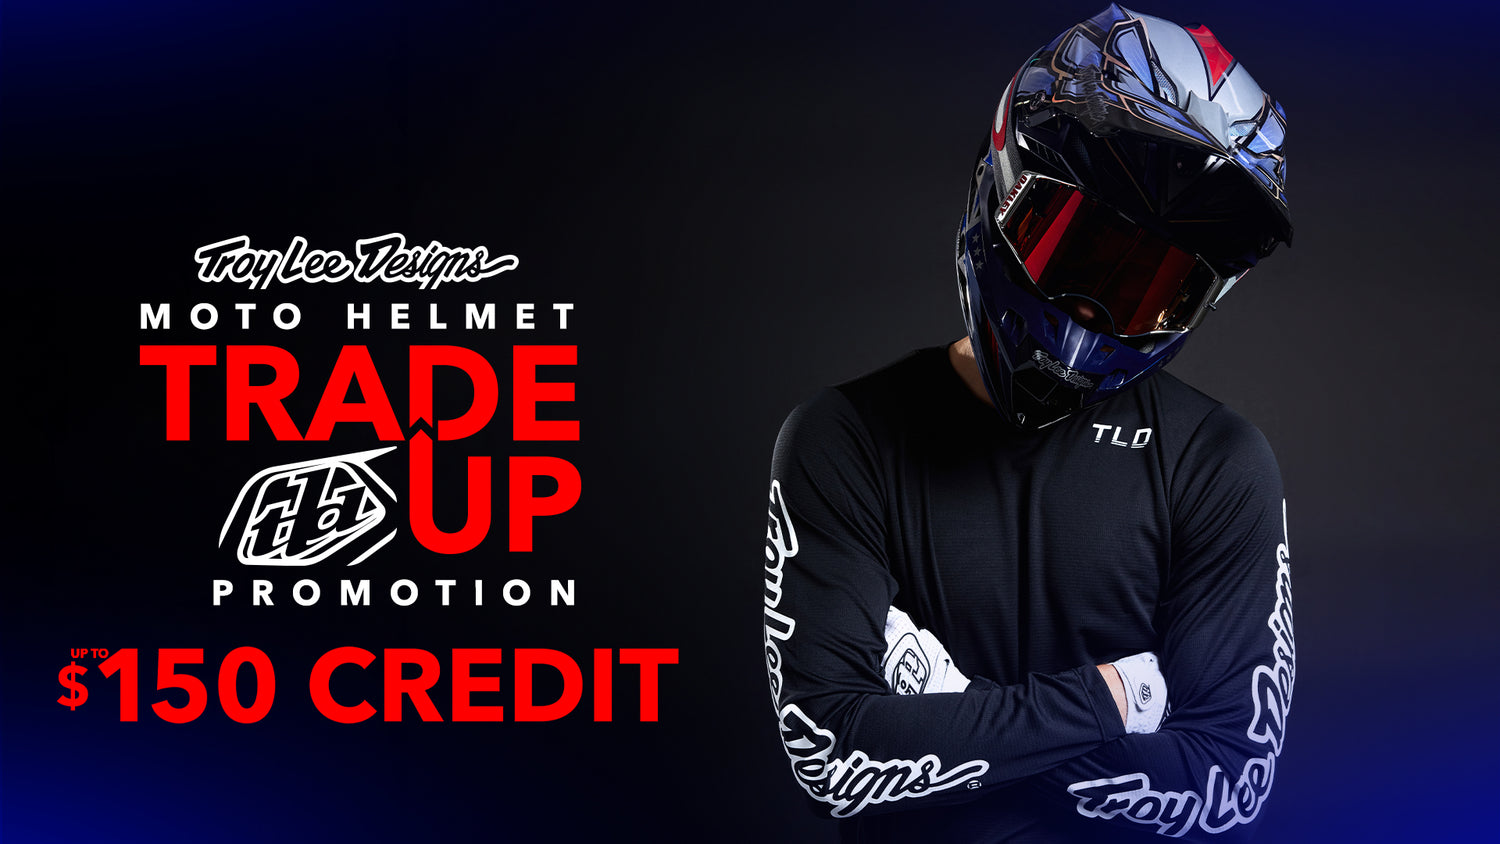 Moto Helmet Trade up call to action image